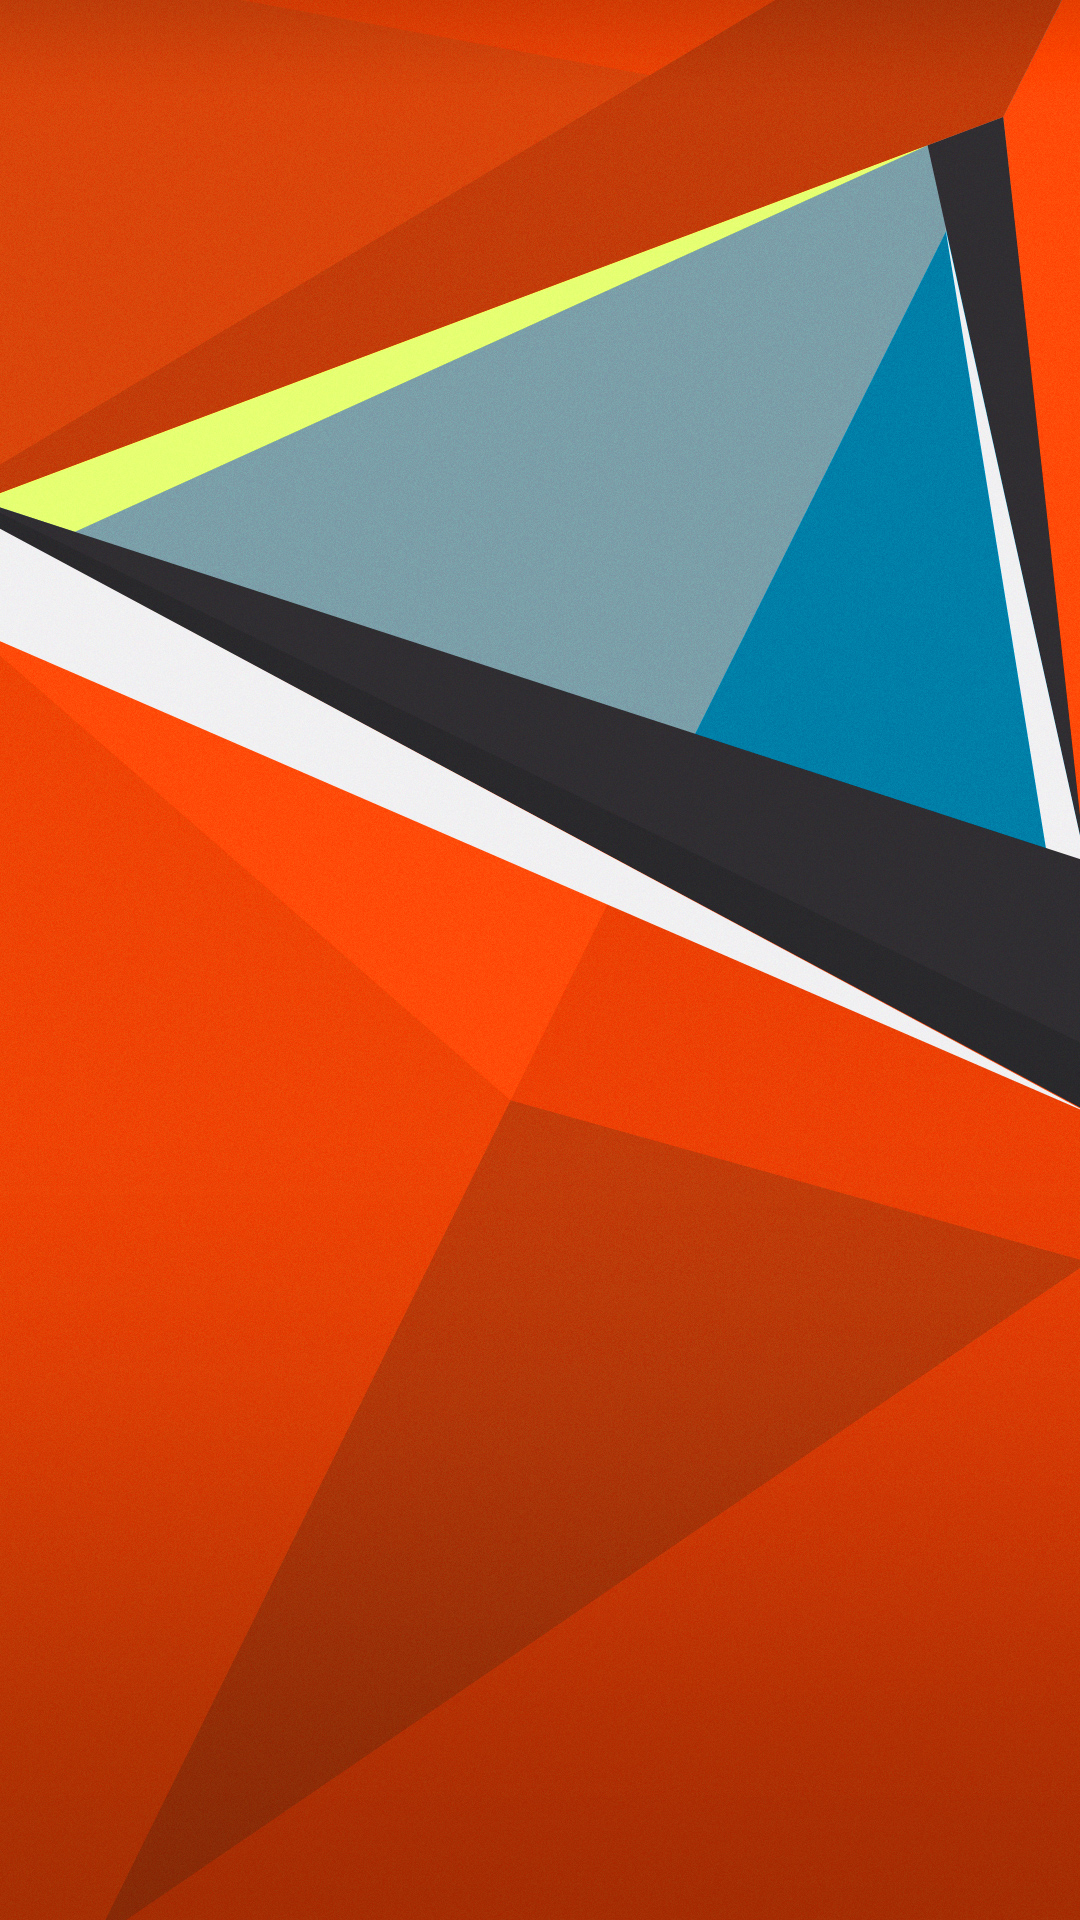 132911 4K, Material Design, Stock, Android - Rare Gallery HD Wallpapers